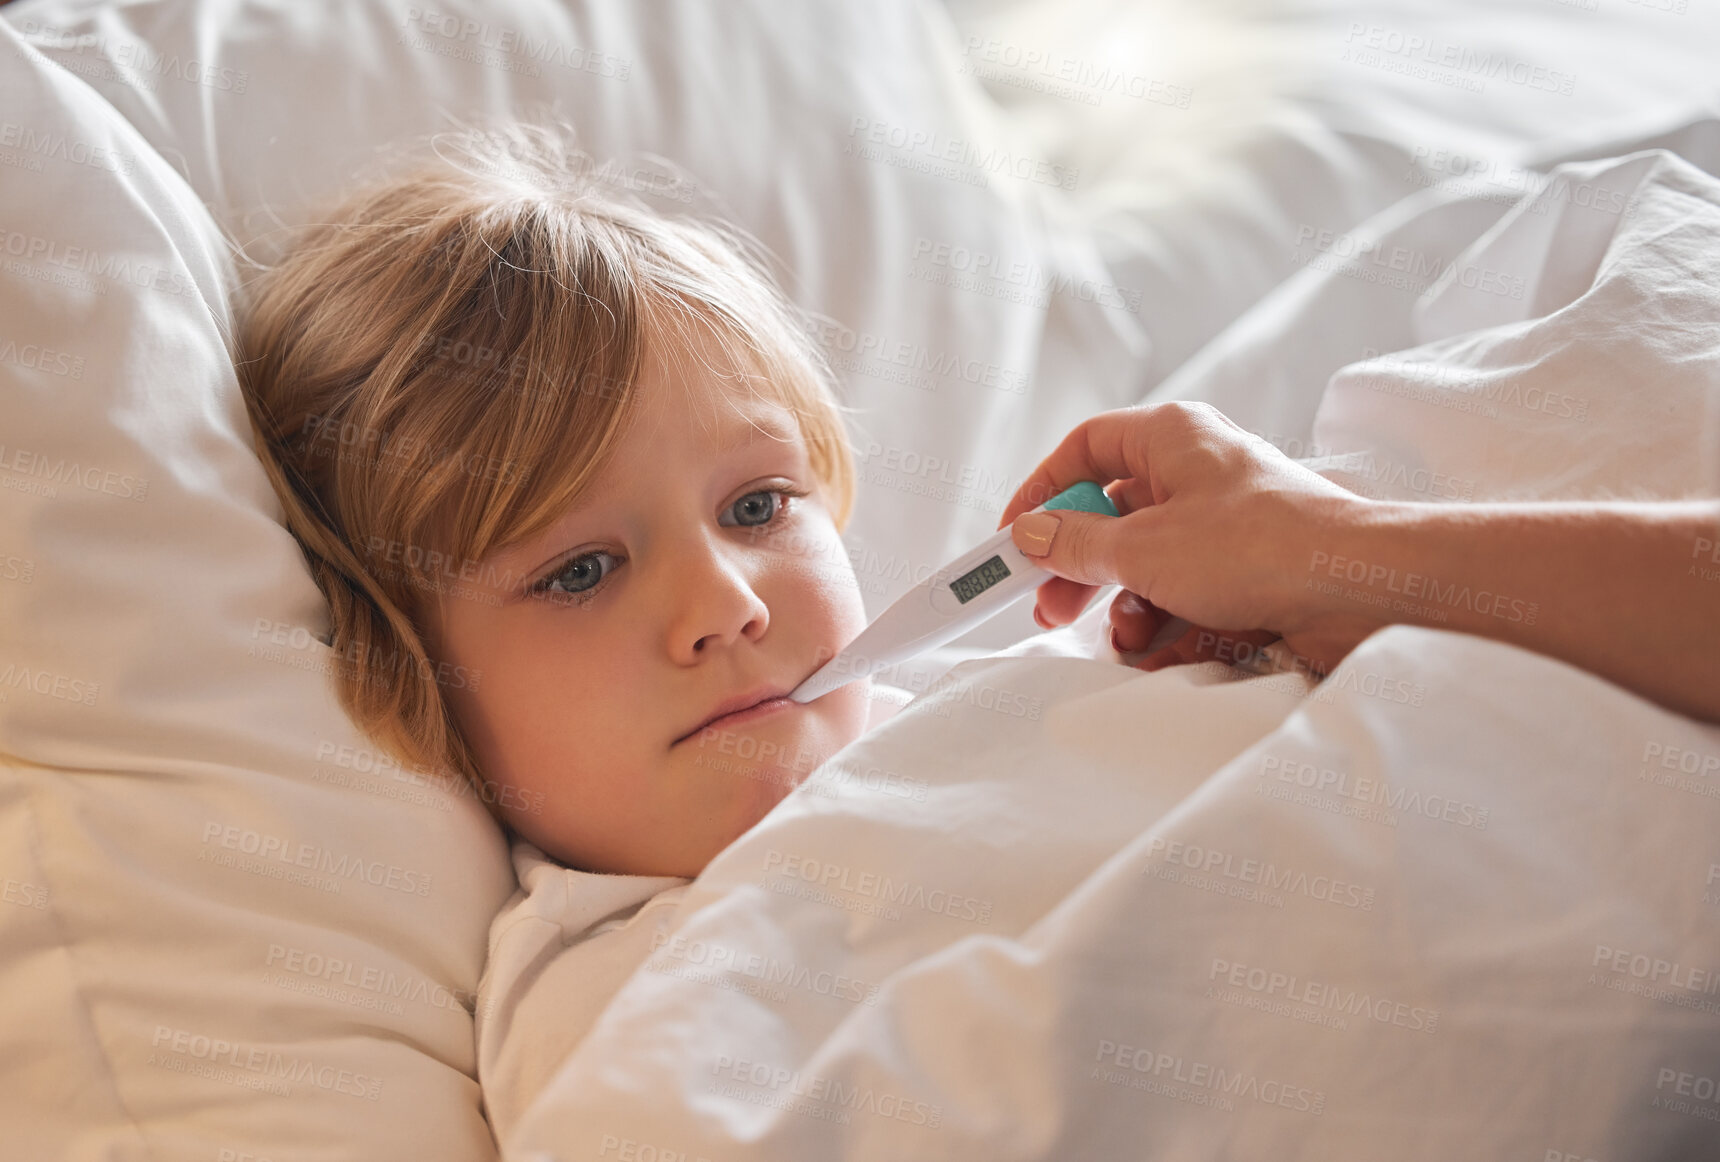 Buy stock photo Shot of an unrecognisable woman taking a little girl’s temperature with a thermometer in bed at home